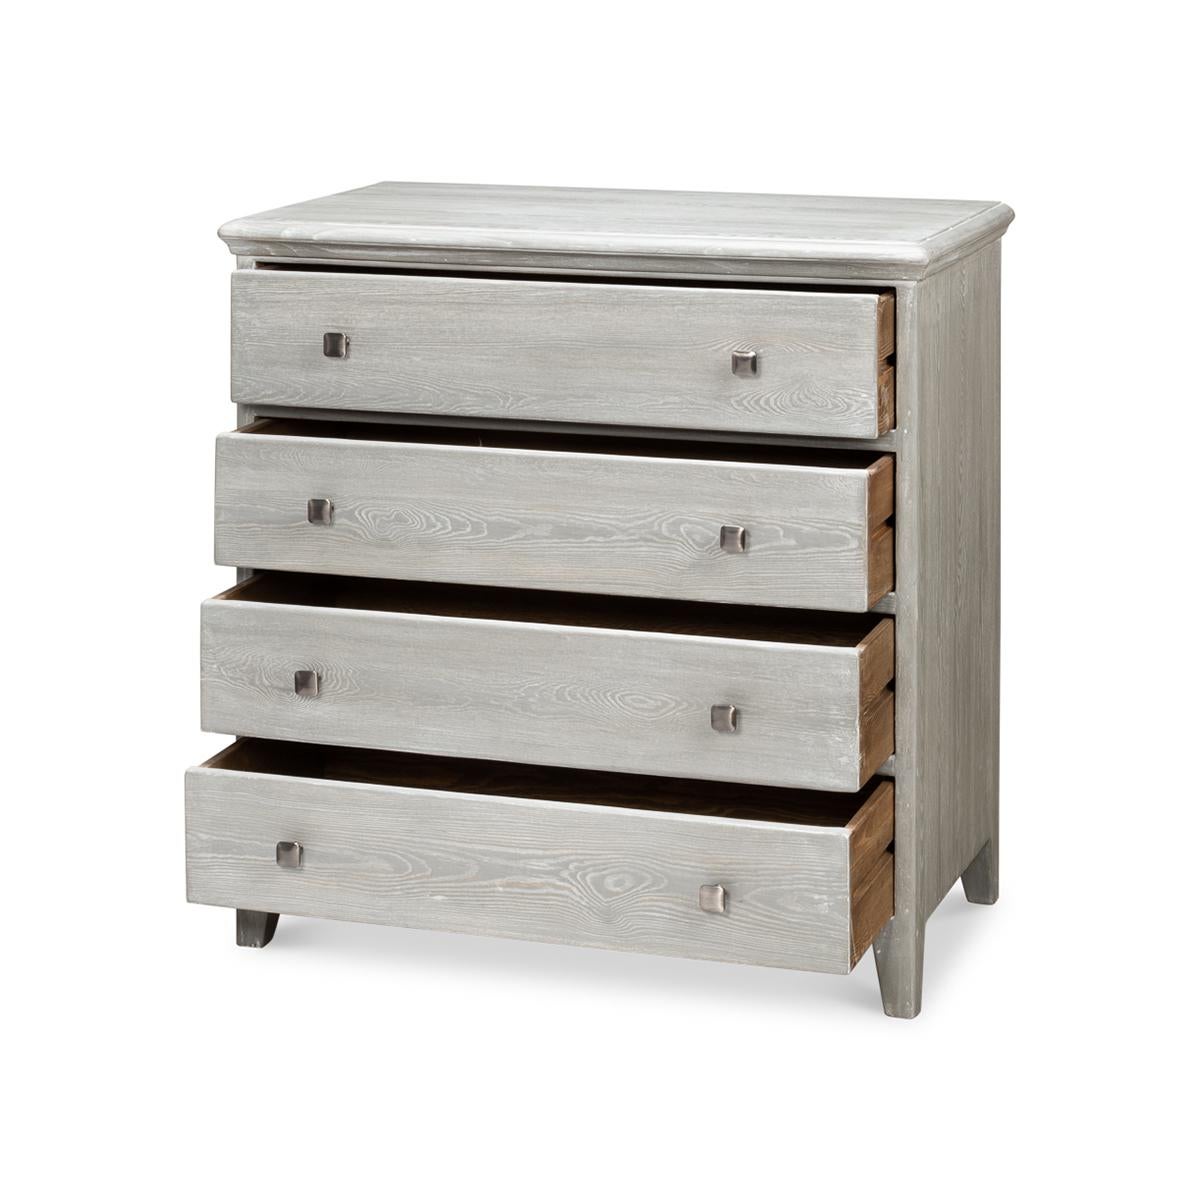 Rustic Classic Four Drawer Chest - Gray Wash For Sale